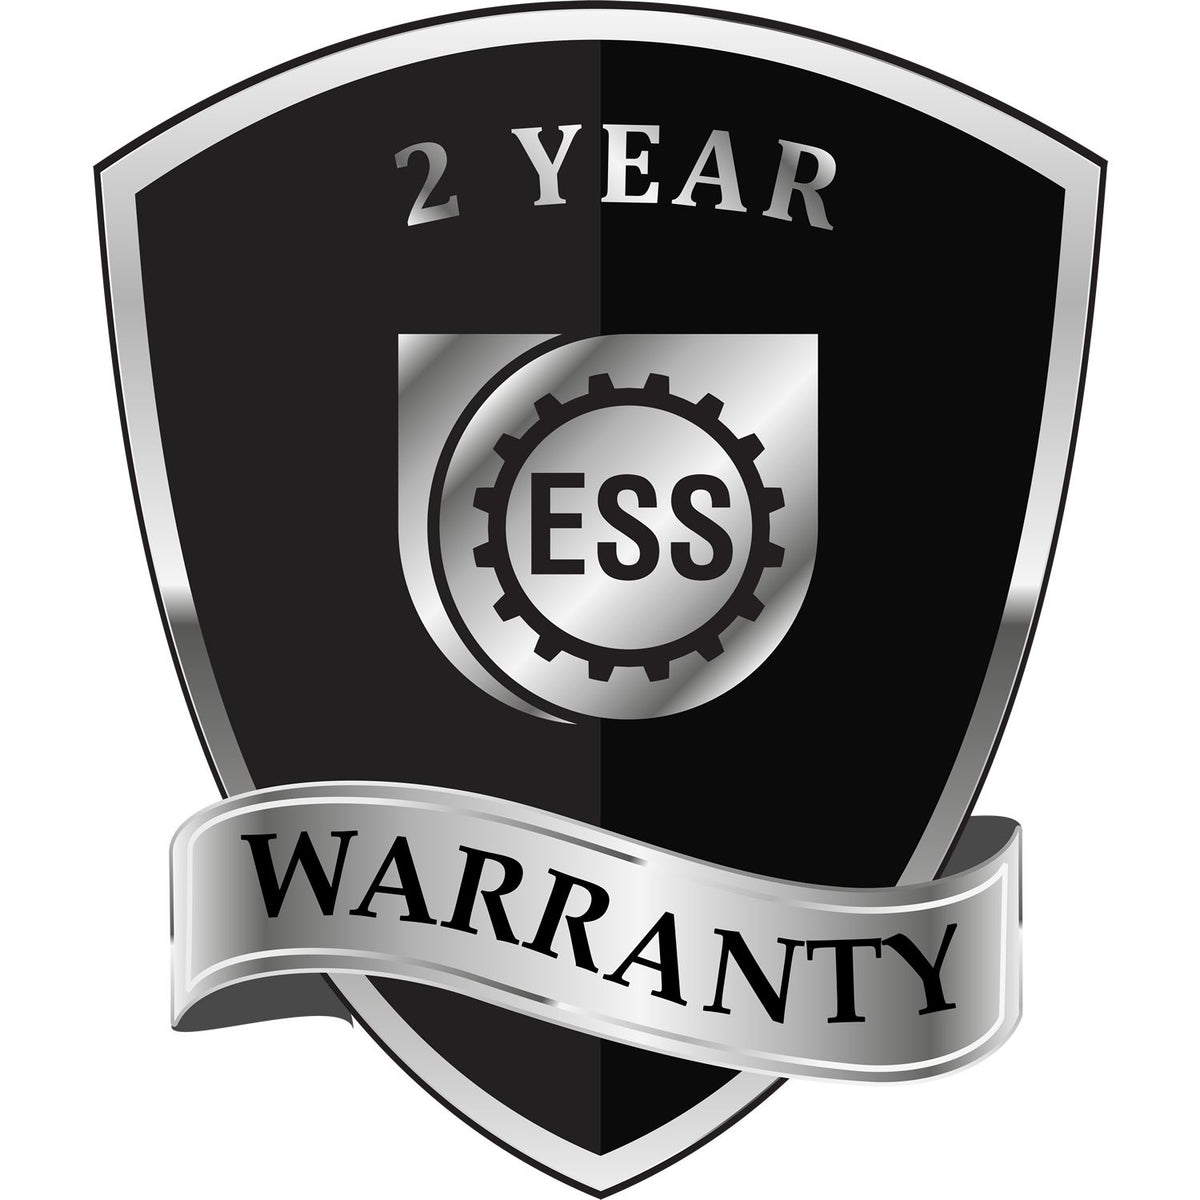 A black and silver badge or emblem showing warranty information for the Gift Alaska Engineer Seal